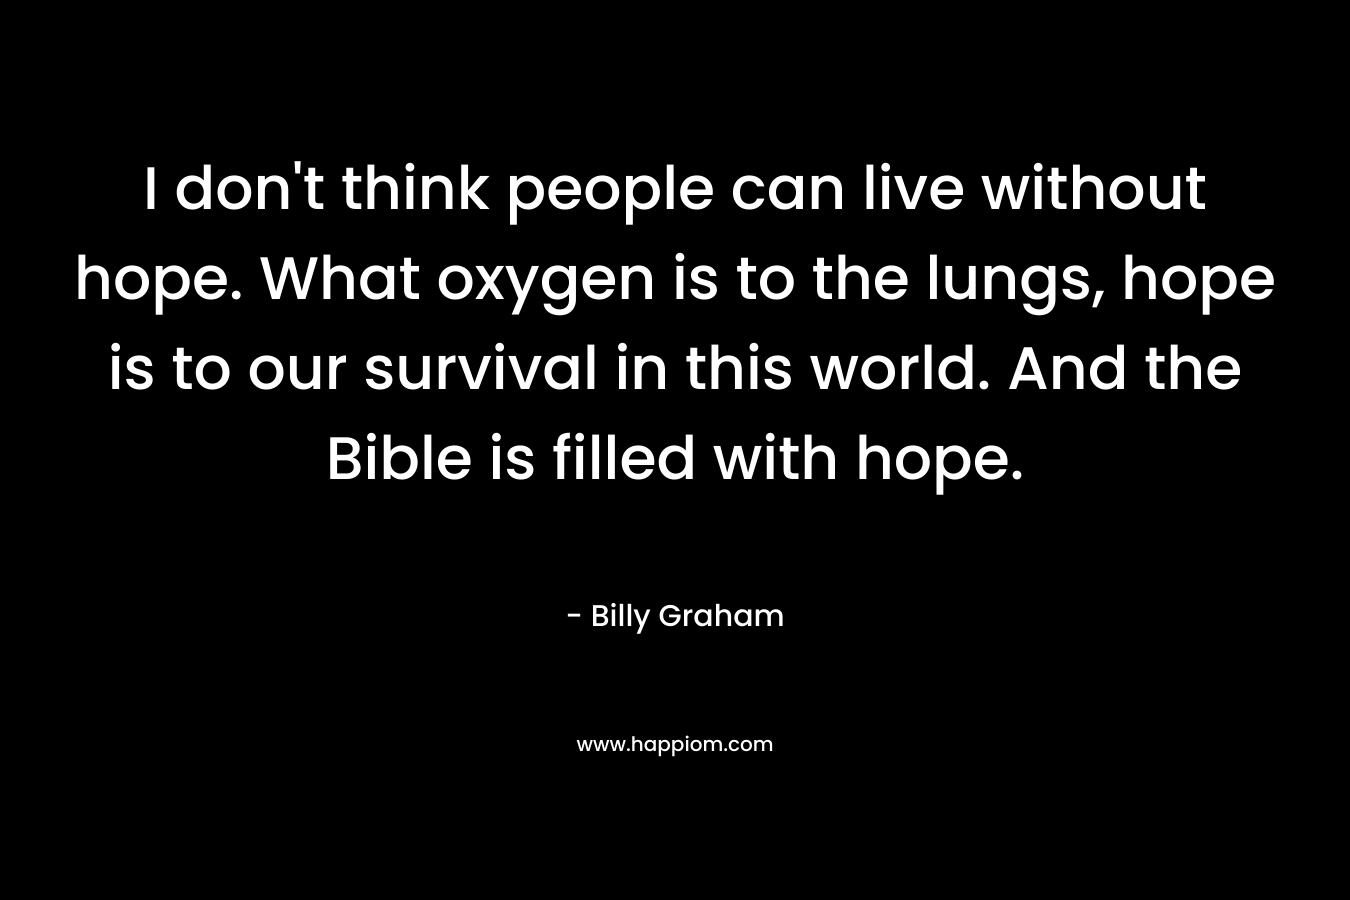 I don't think people can live without hope. What oxygen is to the lungs, hope is to our survival in this world. And the Bible is filled with hope.